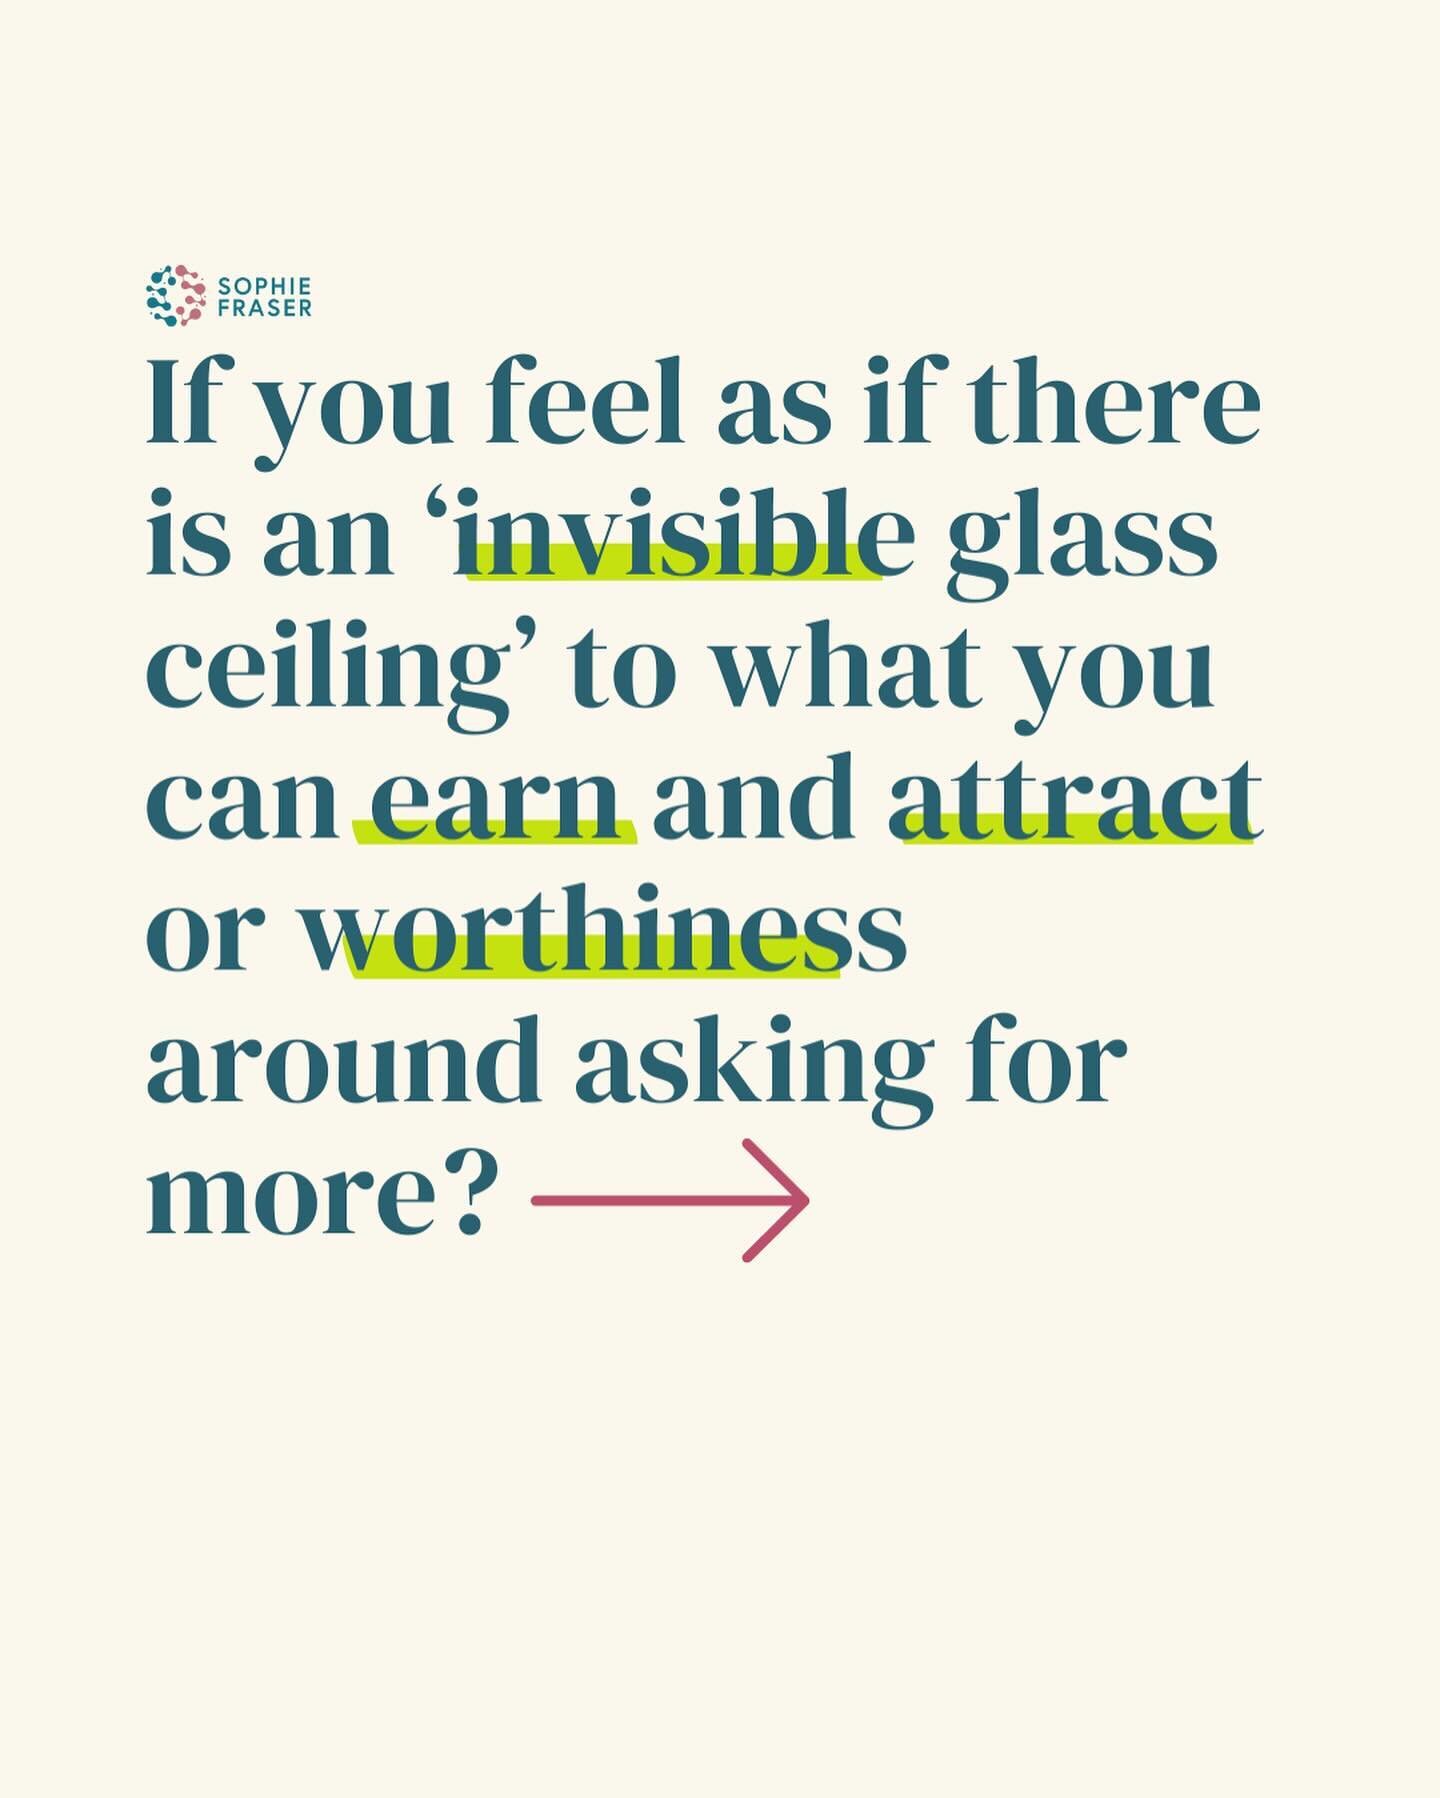 Feeling like there is an &lsquo;invisible glass ceiling&rsquo; to what you can earn and attract&hellip; 

Or worthiness around asking for more. 

Were red flags for me. 

Obvious signs of a scarcity mindset.

When I qualified I was so excited to be o